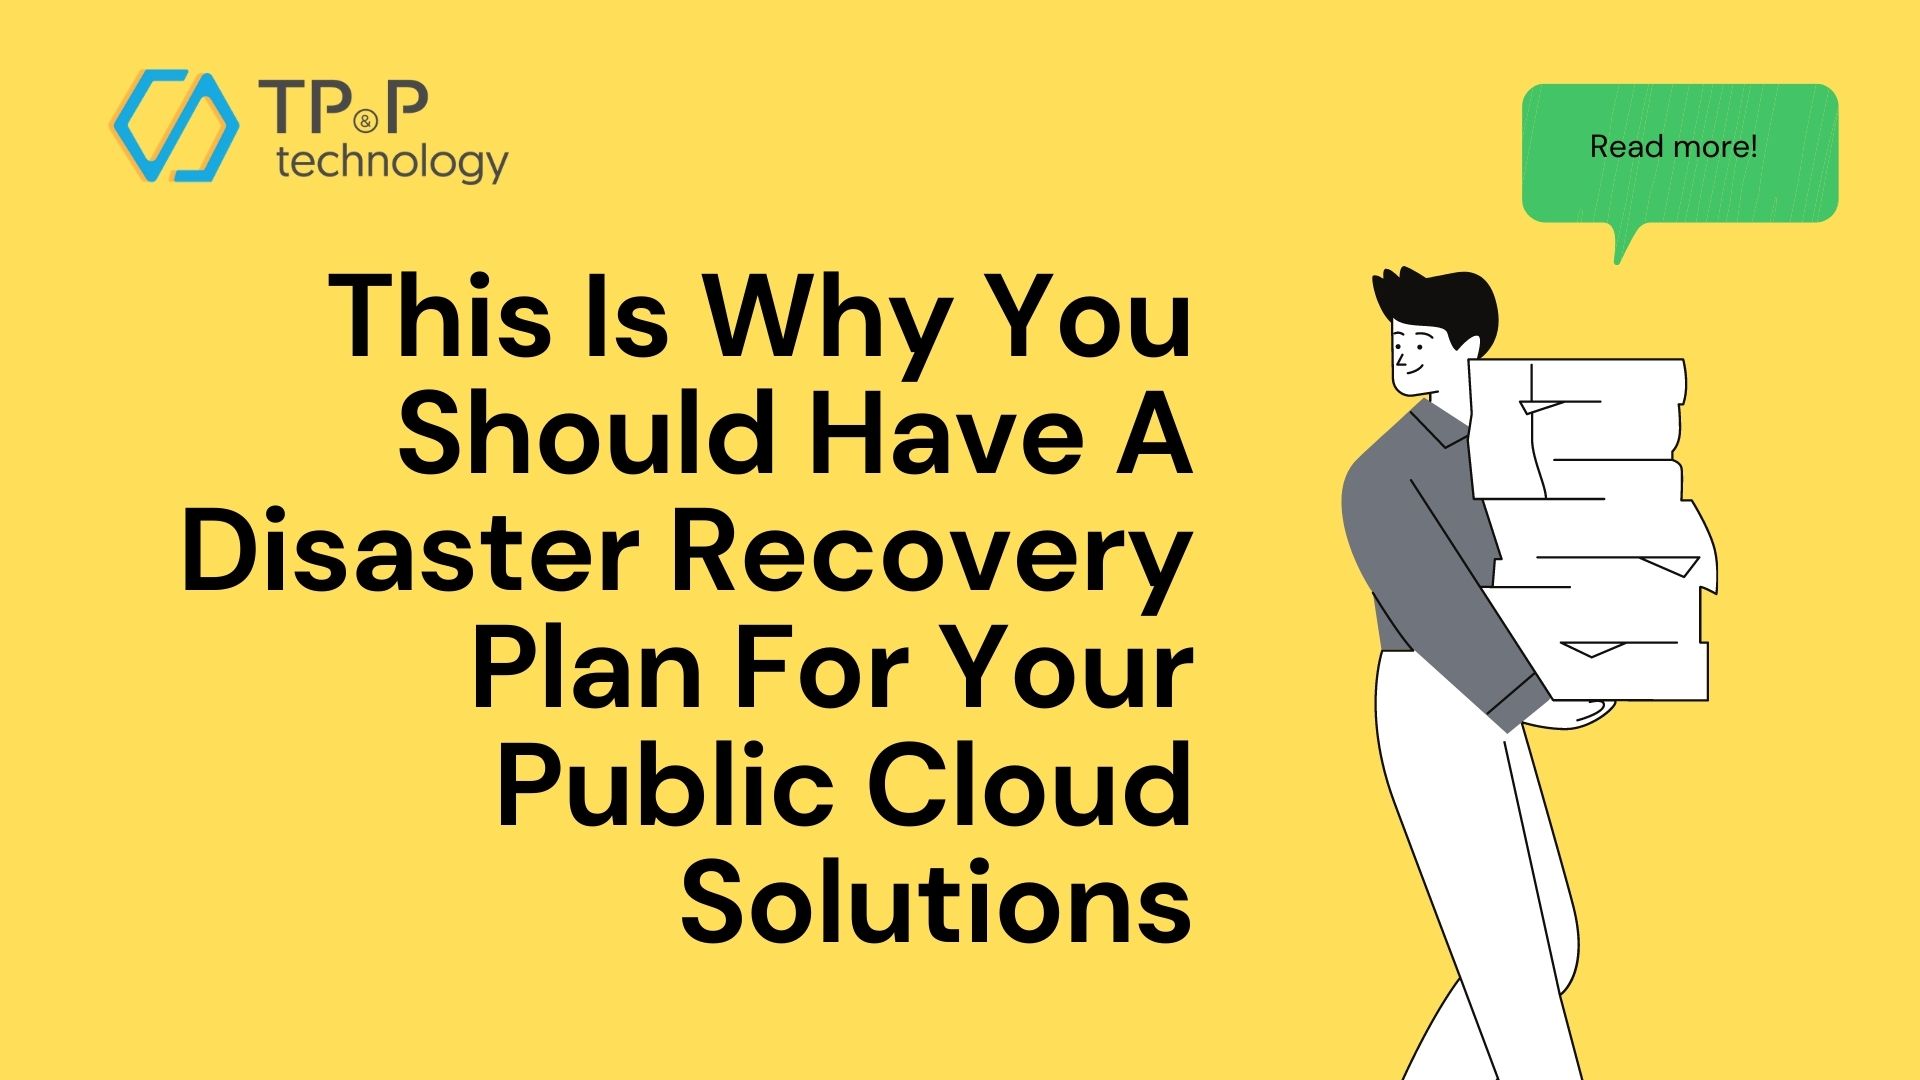 This Is Why You Should Have A Disaster Recovery Plan For Your Public Cloud Solutions